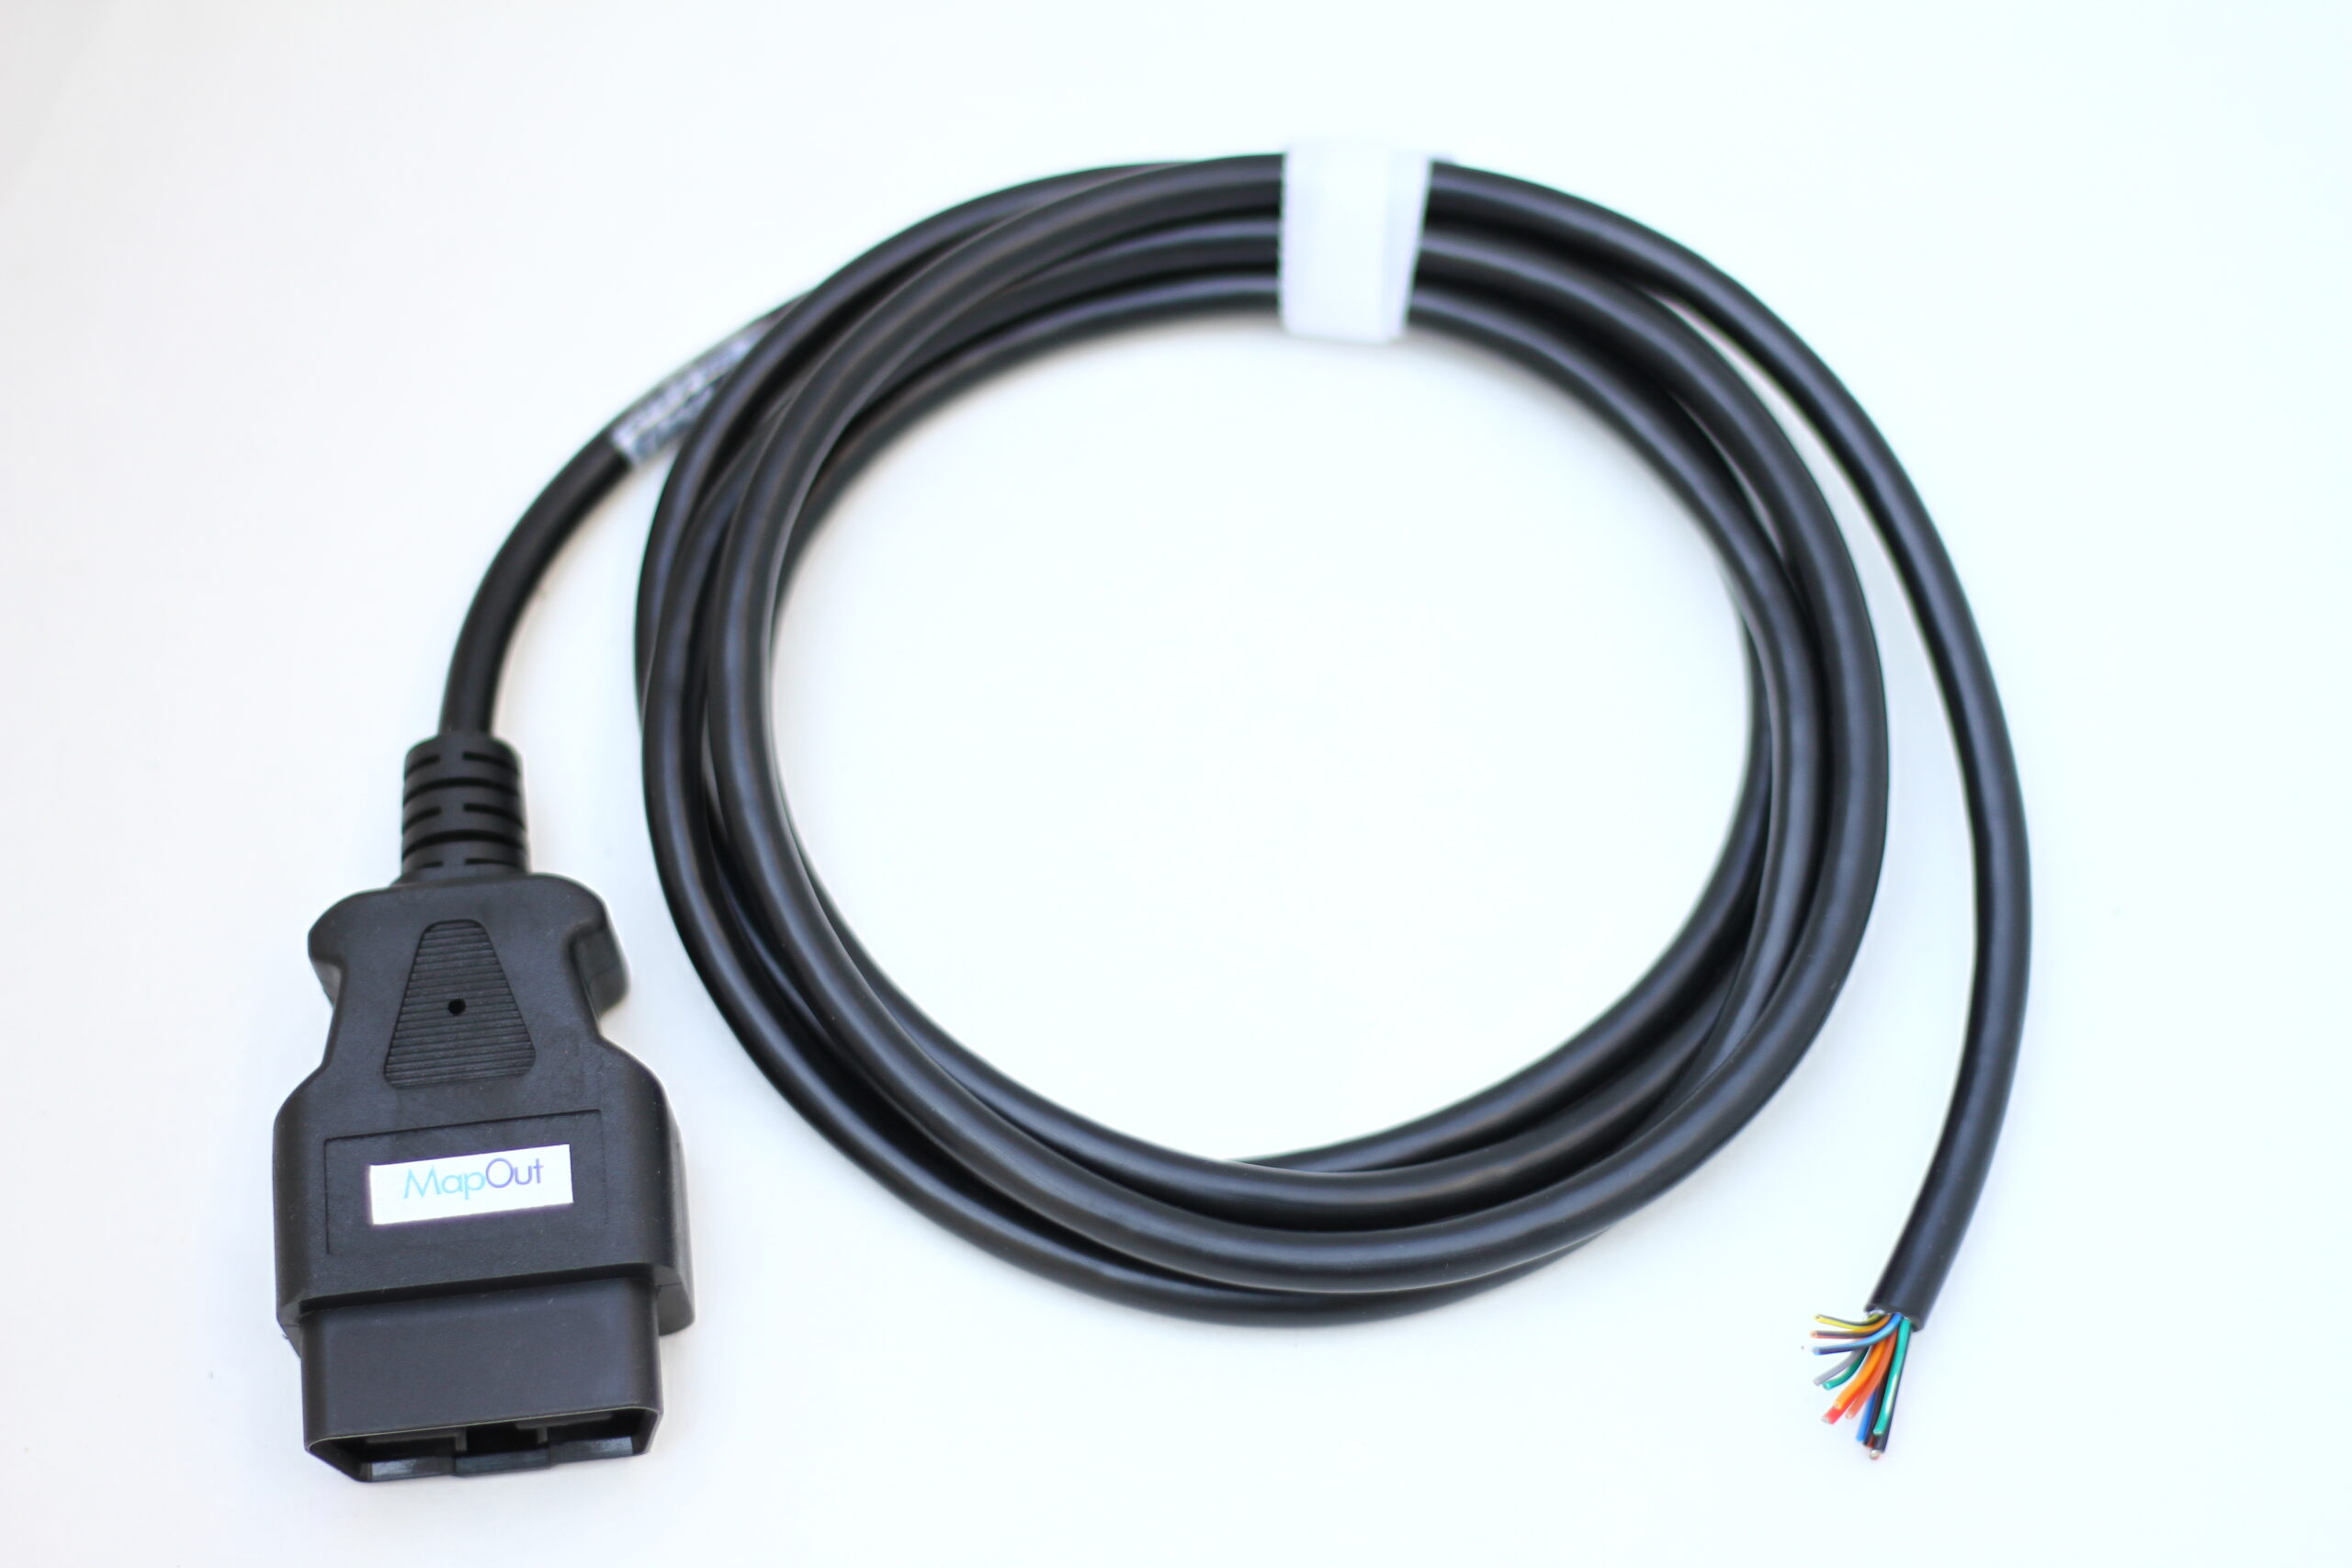 Obd connector cable OBD2 Male Connector cable Extension wire Cable